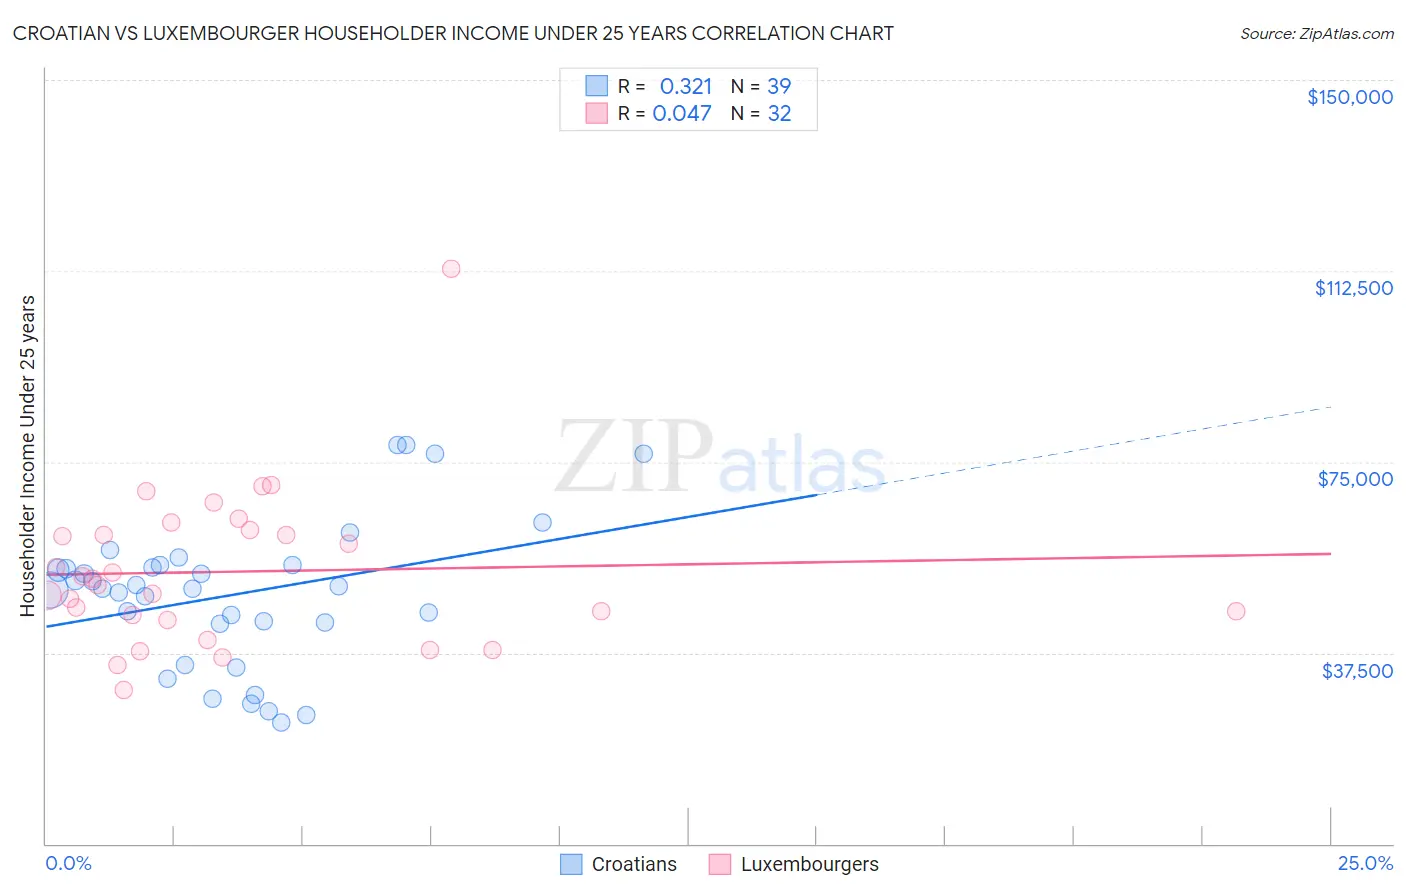 Croatian vs Luxembourger Householder Income Under 25 years